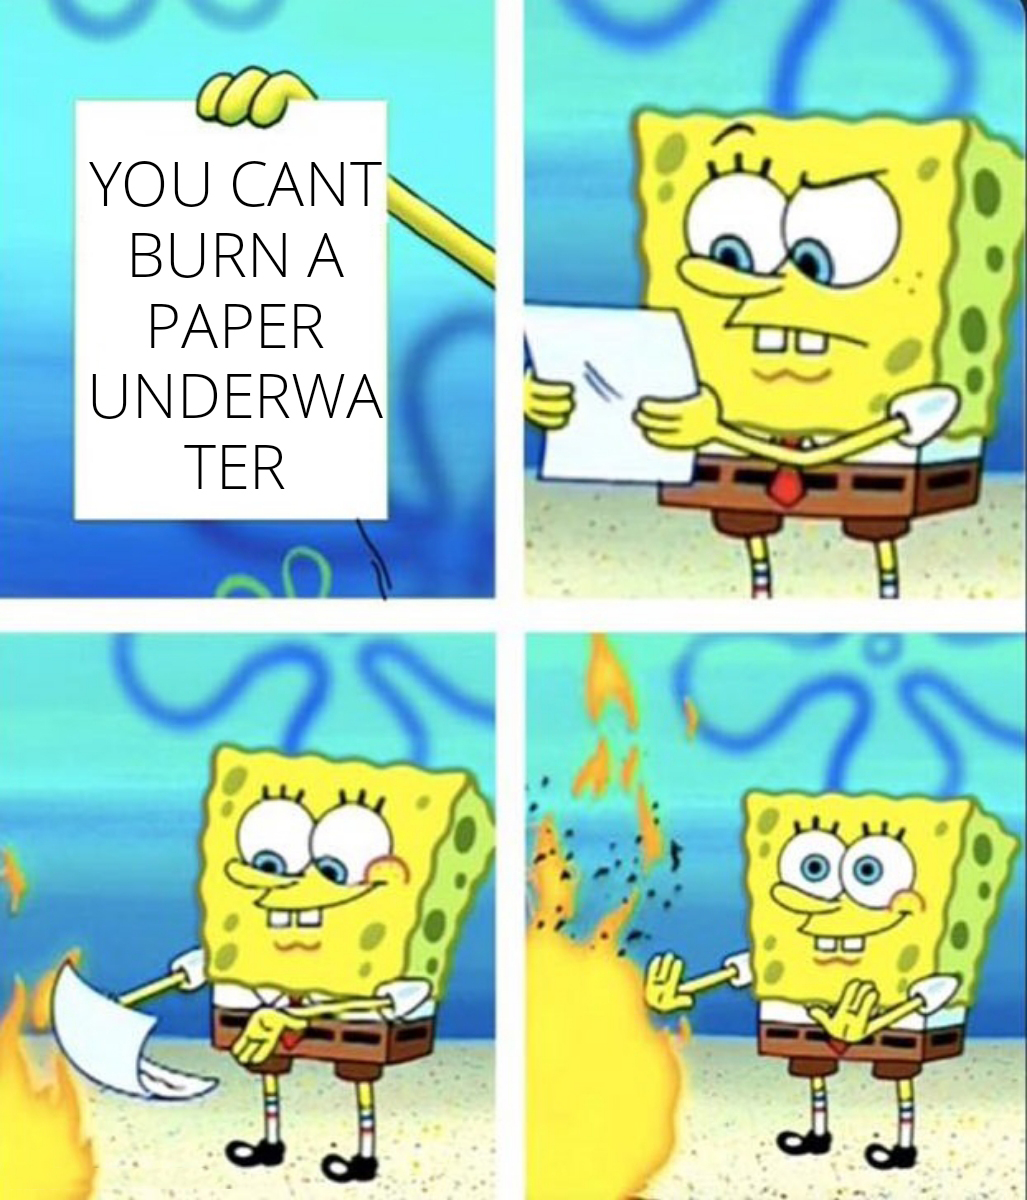 funny memes - Internet meme - You Cant Burn A Paper Underwa Ter Mie